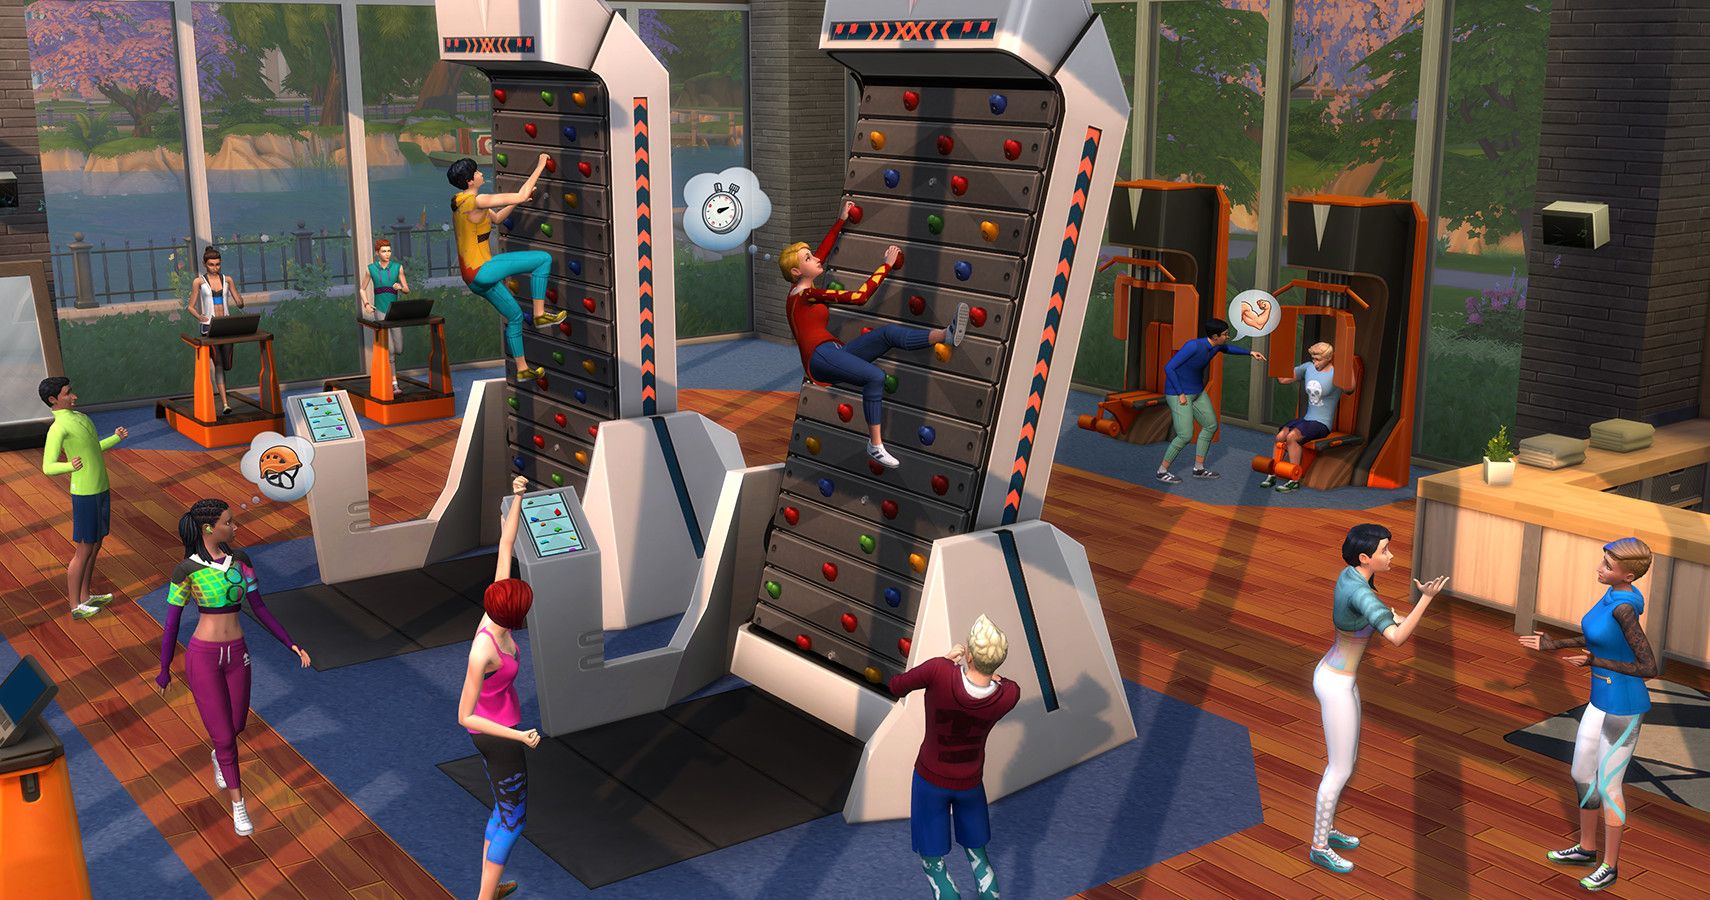 Fitness Stuff promotional shot of sims using the climbing walls.